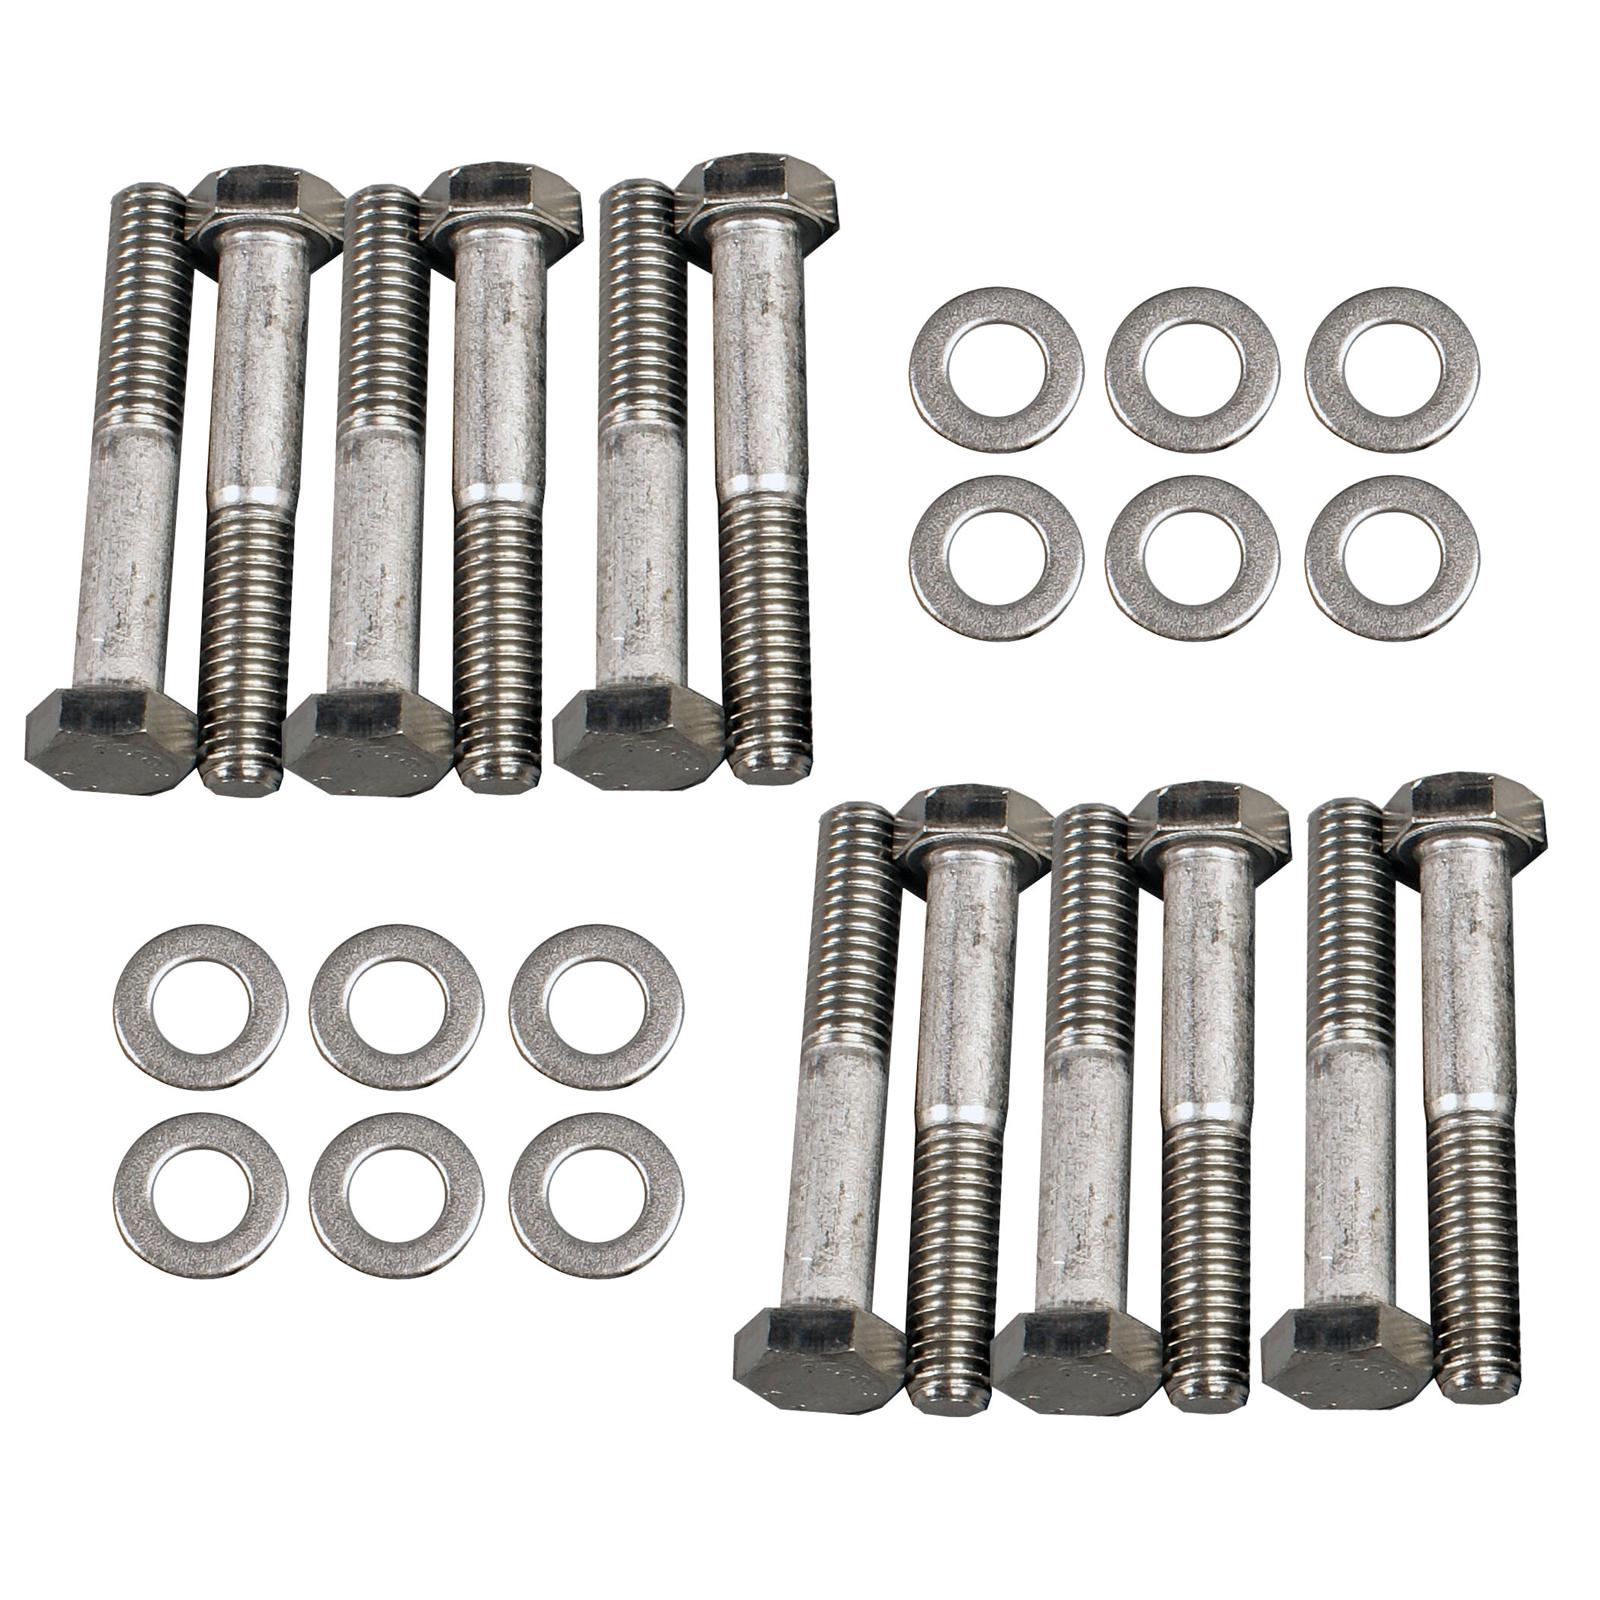 Ford 302 exhaust manifold bolts